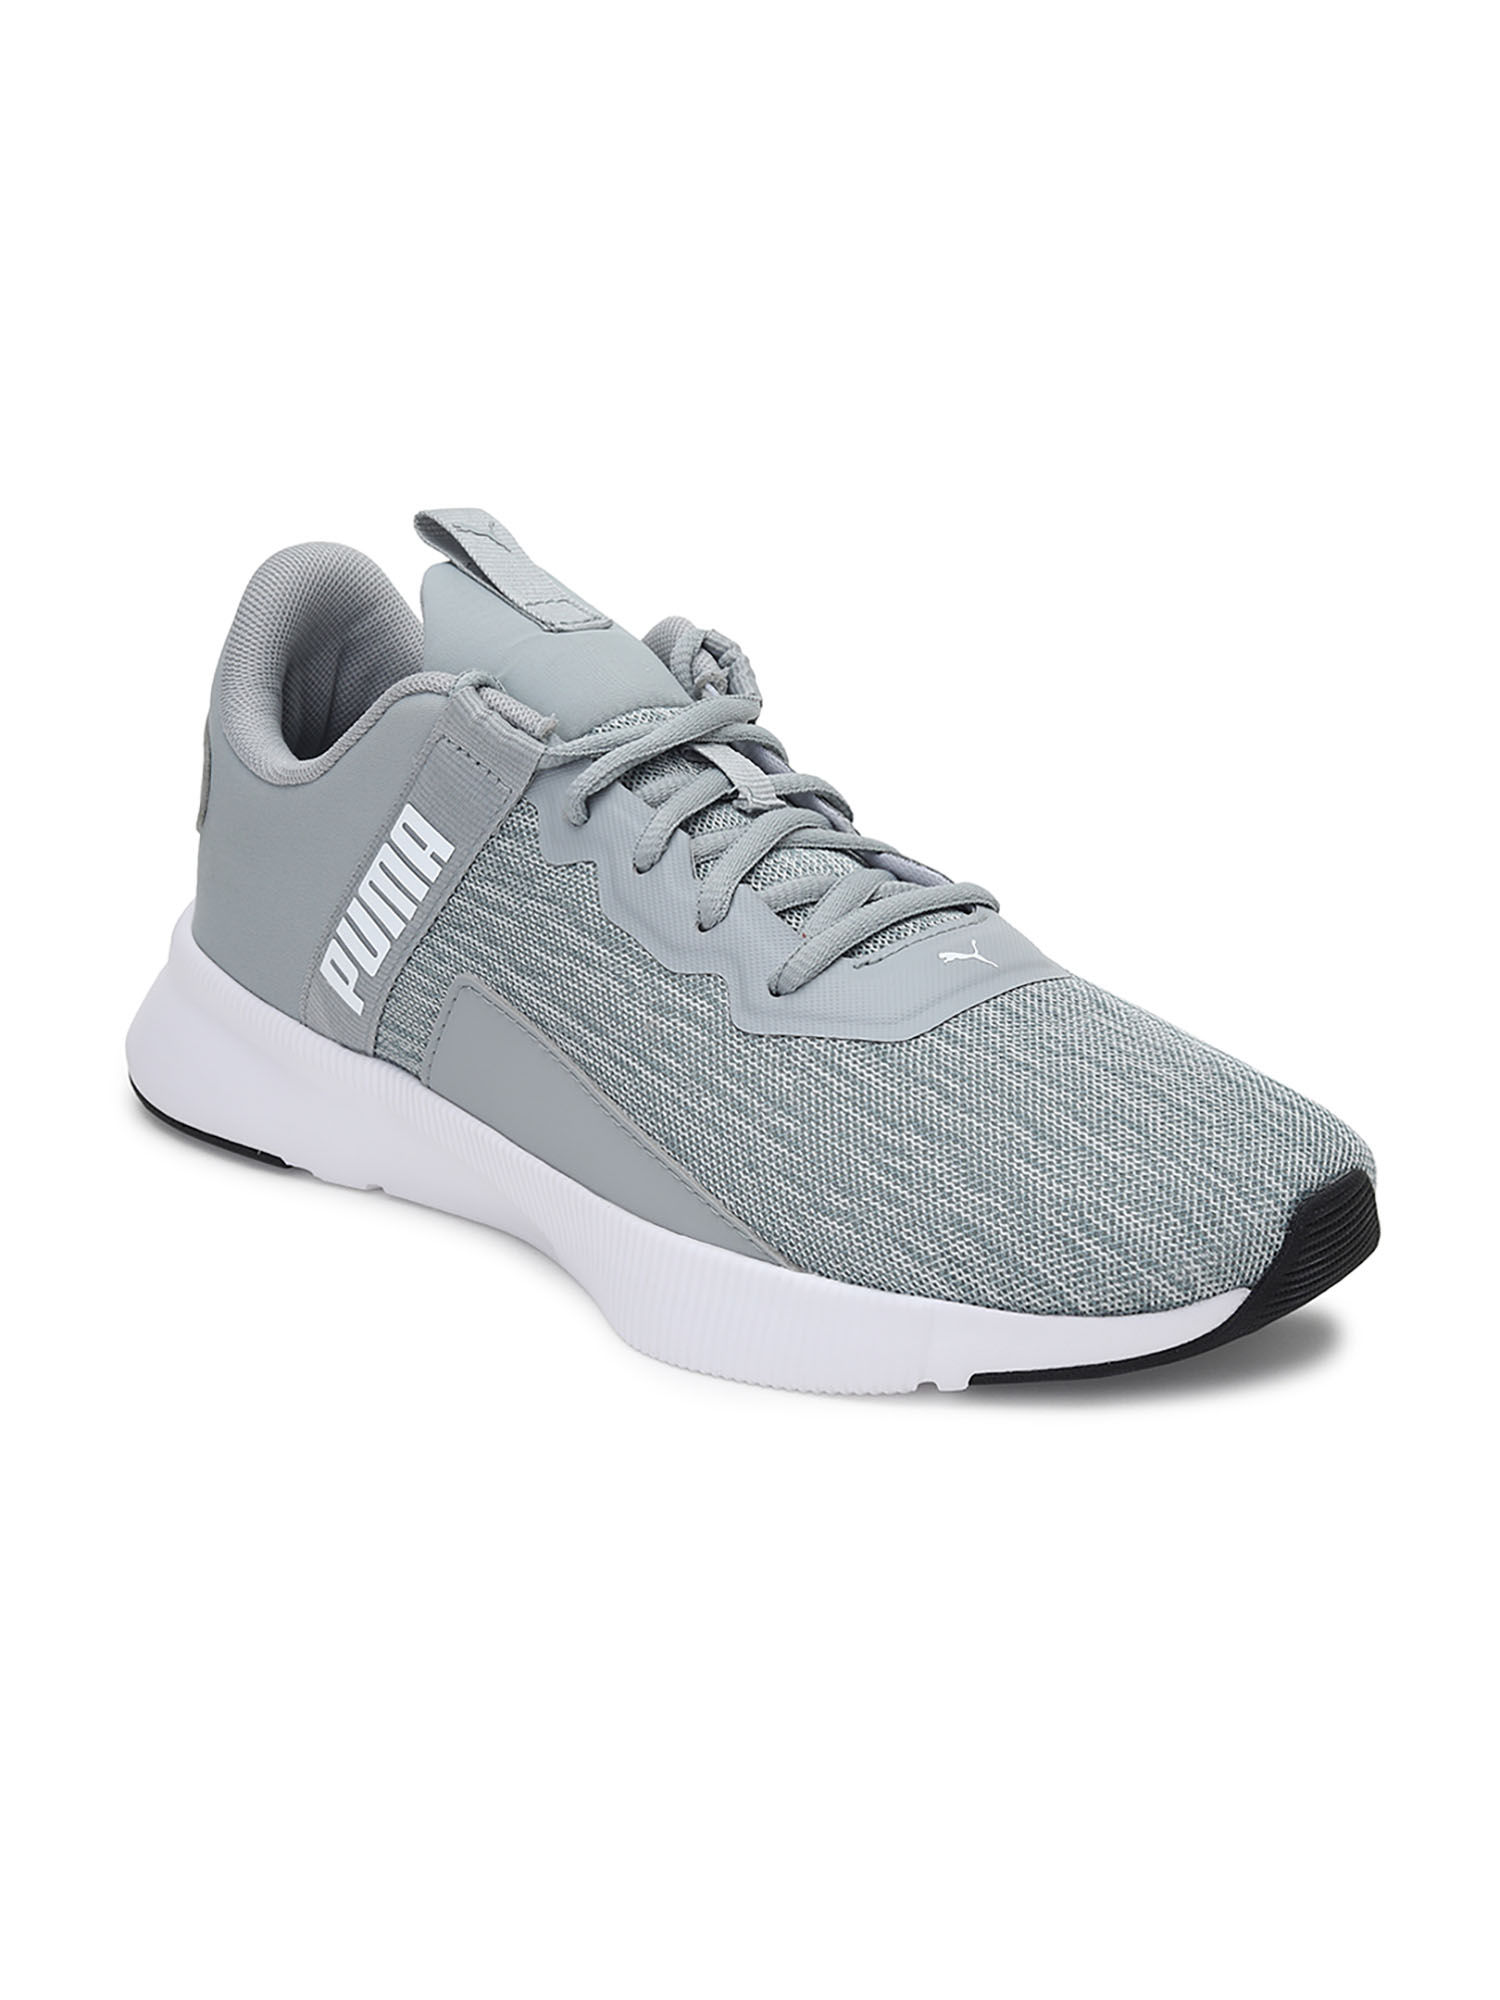 Connected Monograph unfathomable Puma Flyer Beta Softfoam Plus Running Shoes (UK 3): Buy Puma Flyer Beta Softfoam  Plus Running Shoes (UK 3) Online at Best Price in India | Nykaa